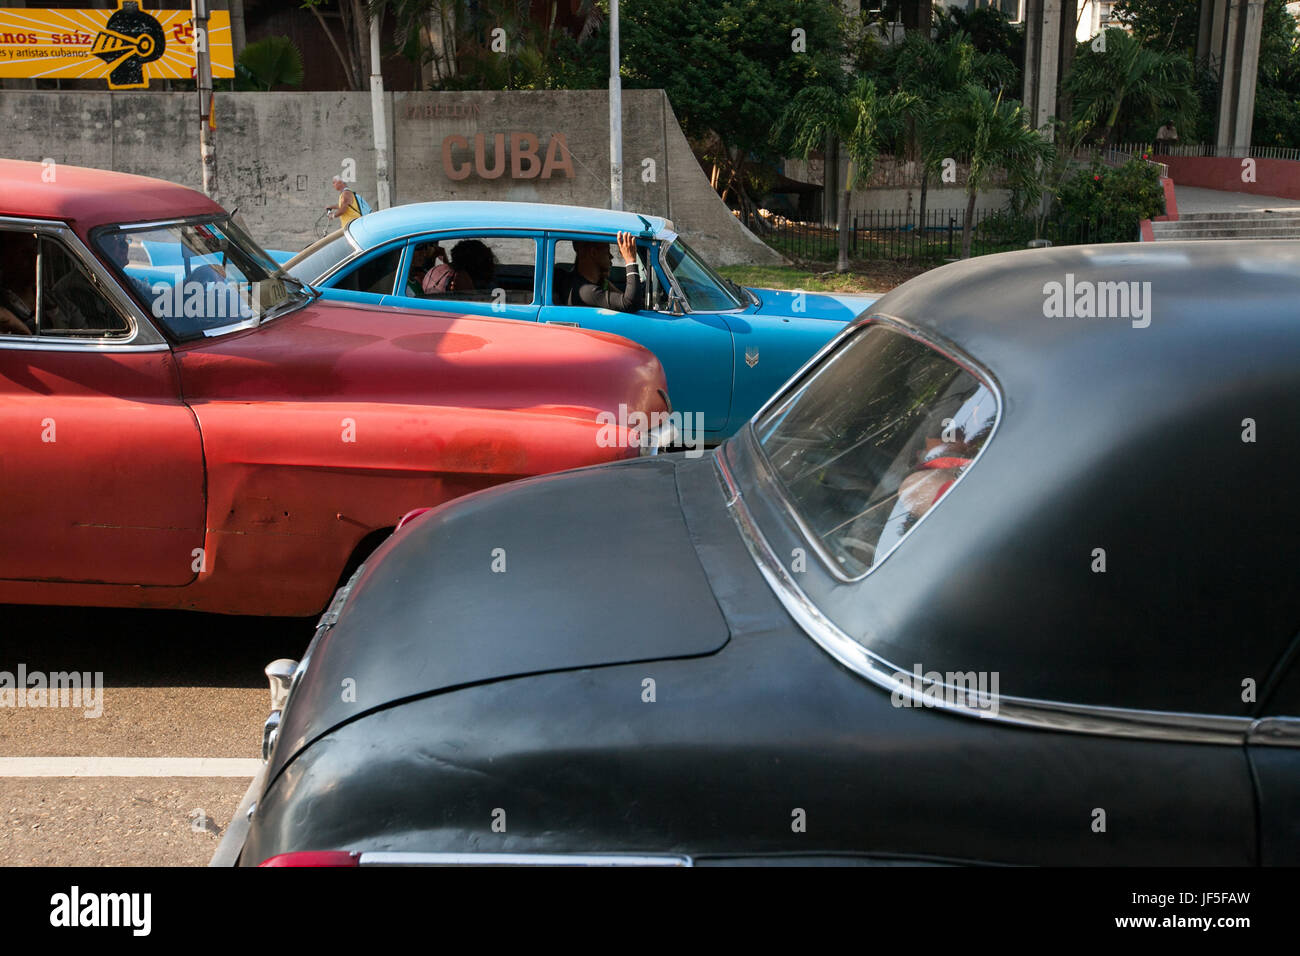 Several colorful, classic American cars line a street in downtown Havana. Stock Photo